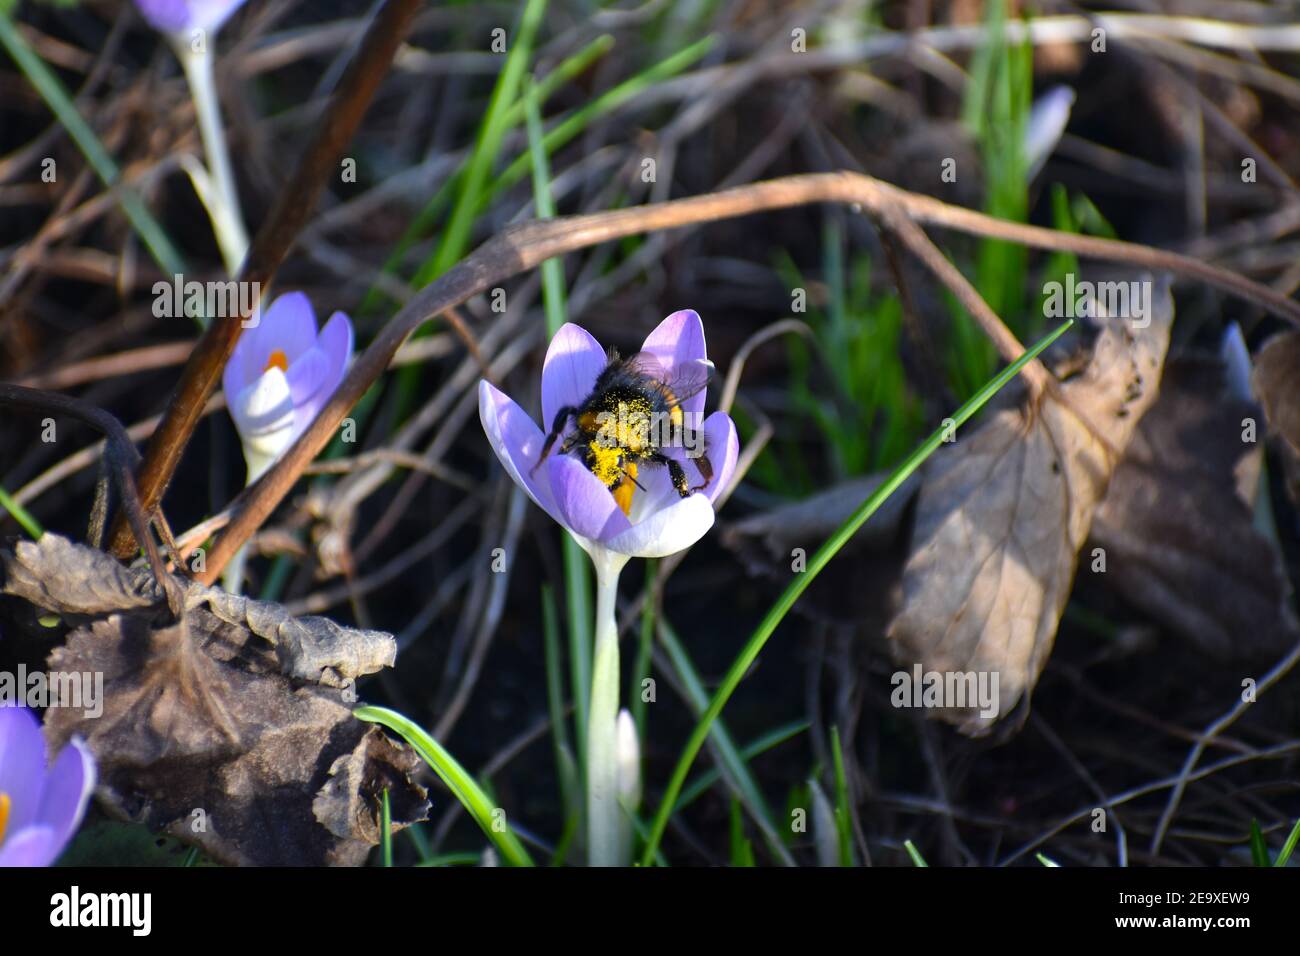 A buff-tailed bumble bee pollinates crocus in the garden Croci provide valuable food source for early insects and naturalise well in lawns and borders Stock Photo